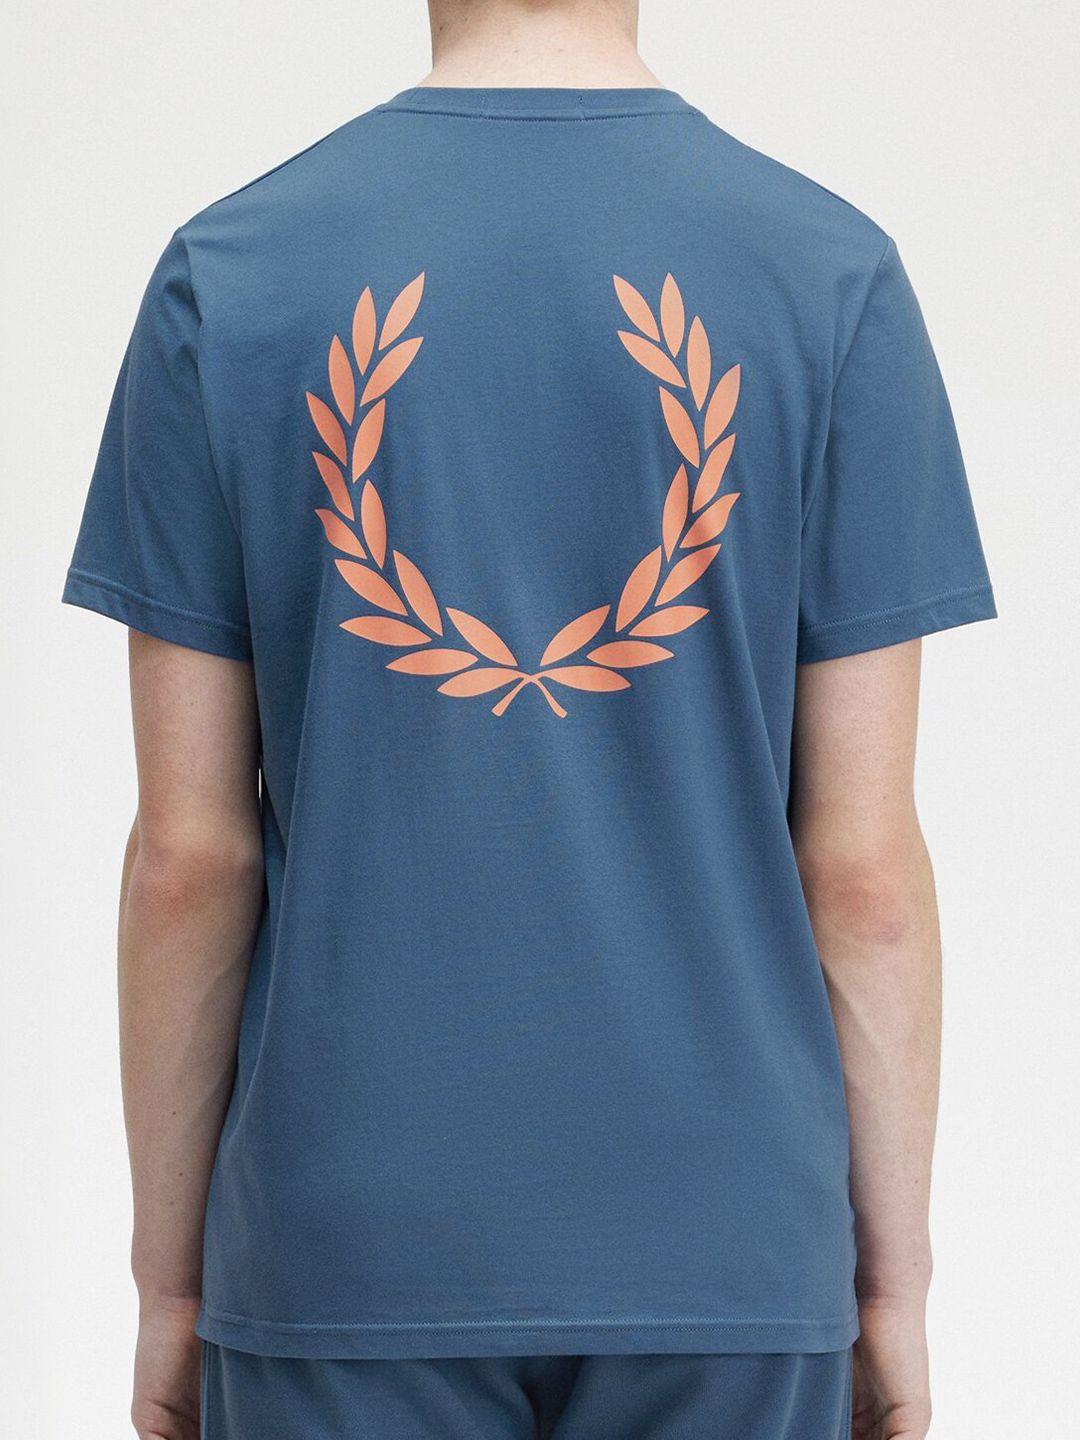 fred perry brand logo printed cotton t-shirt